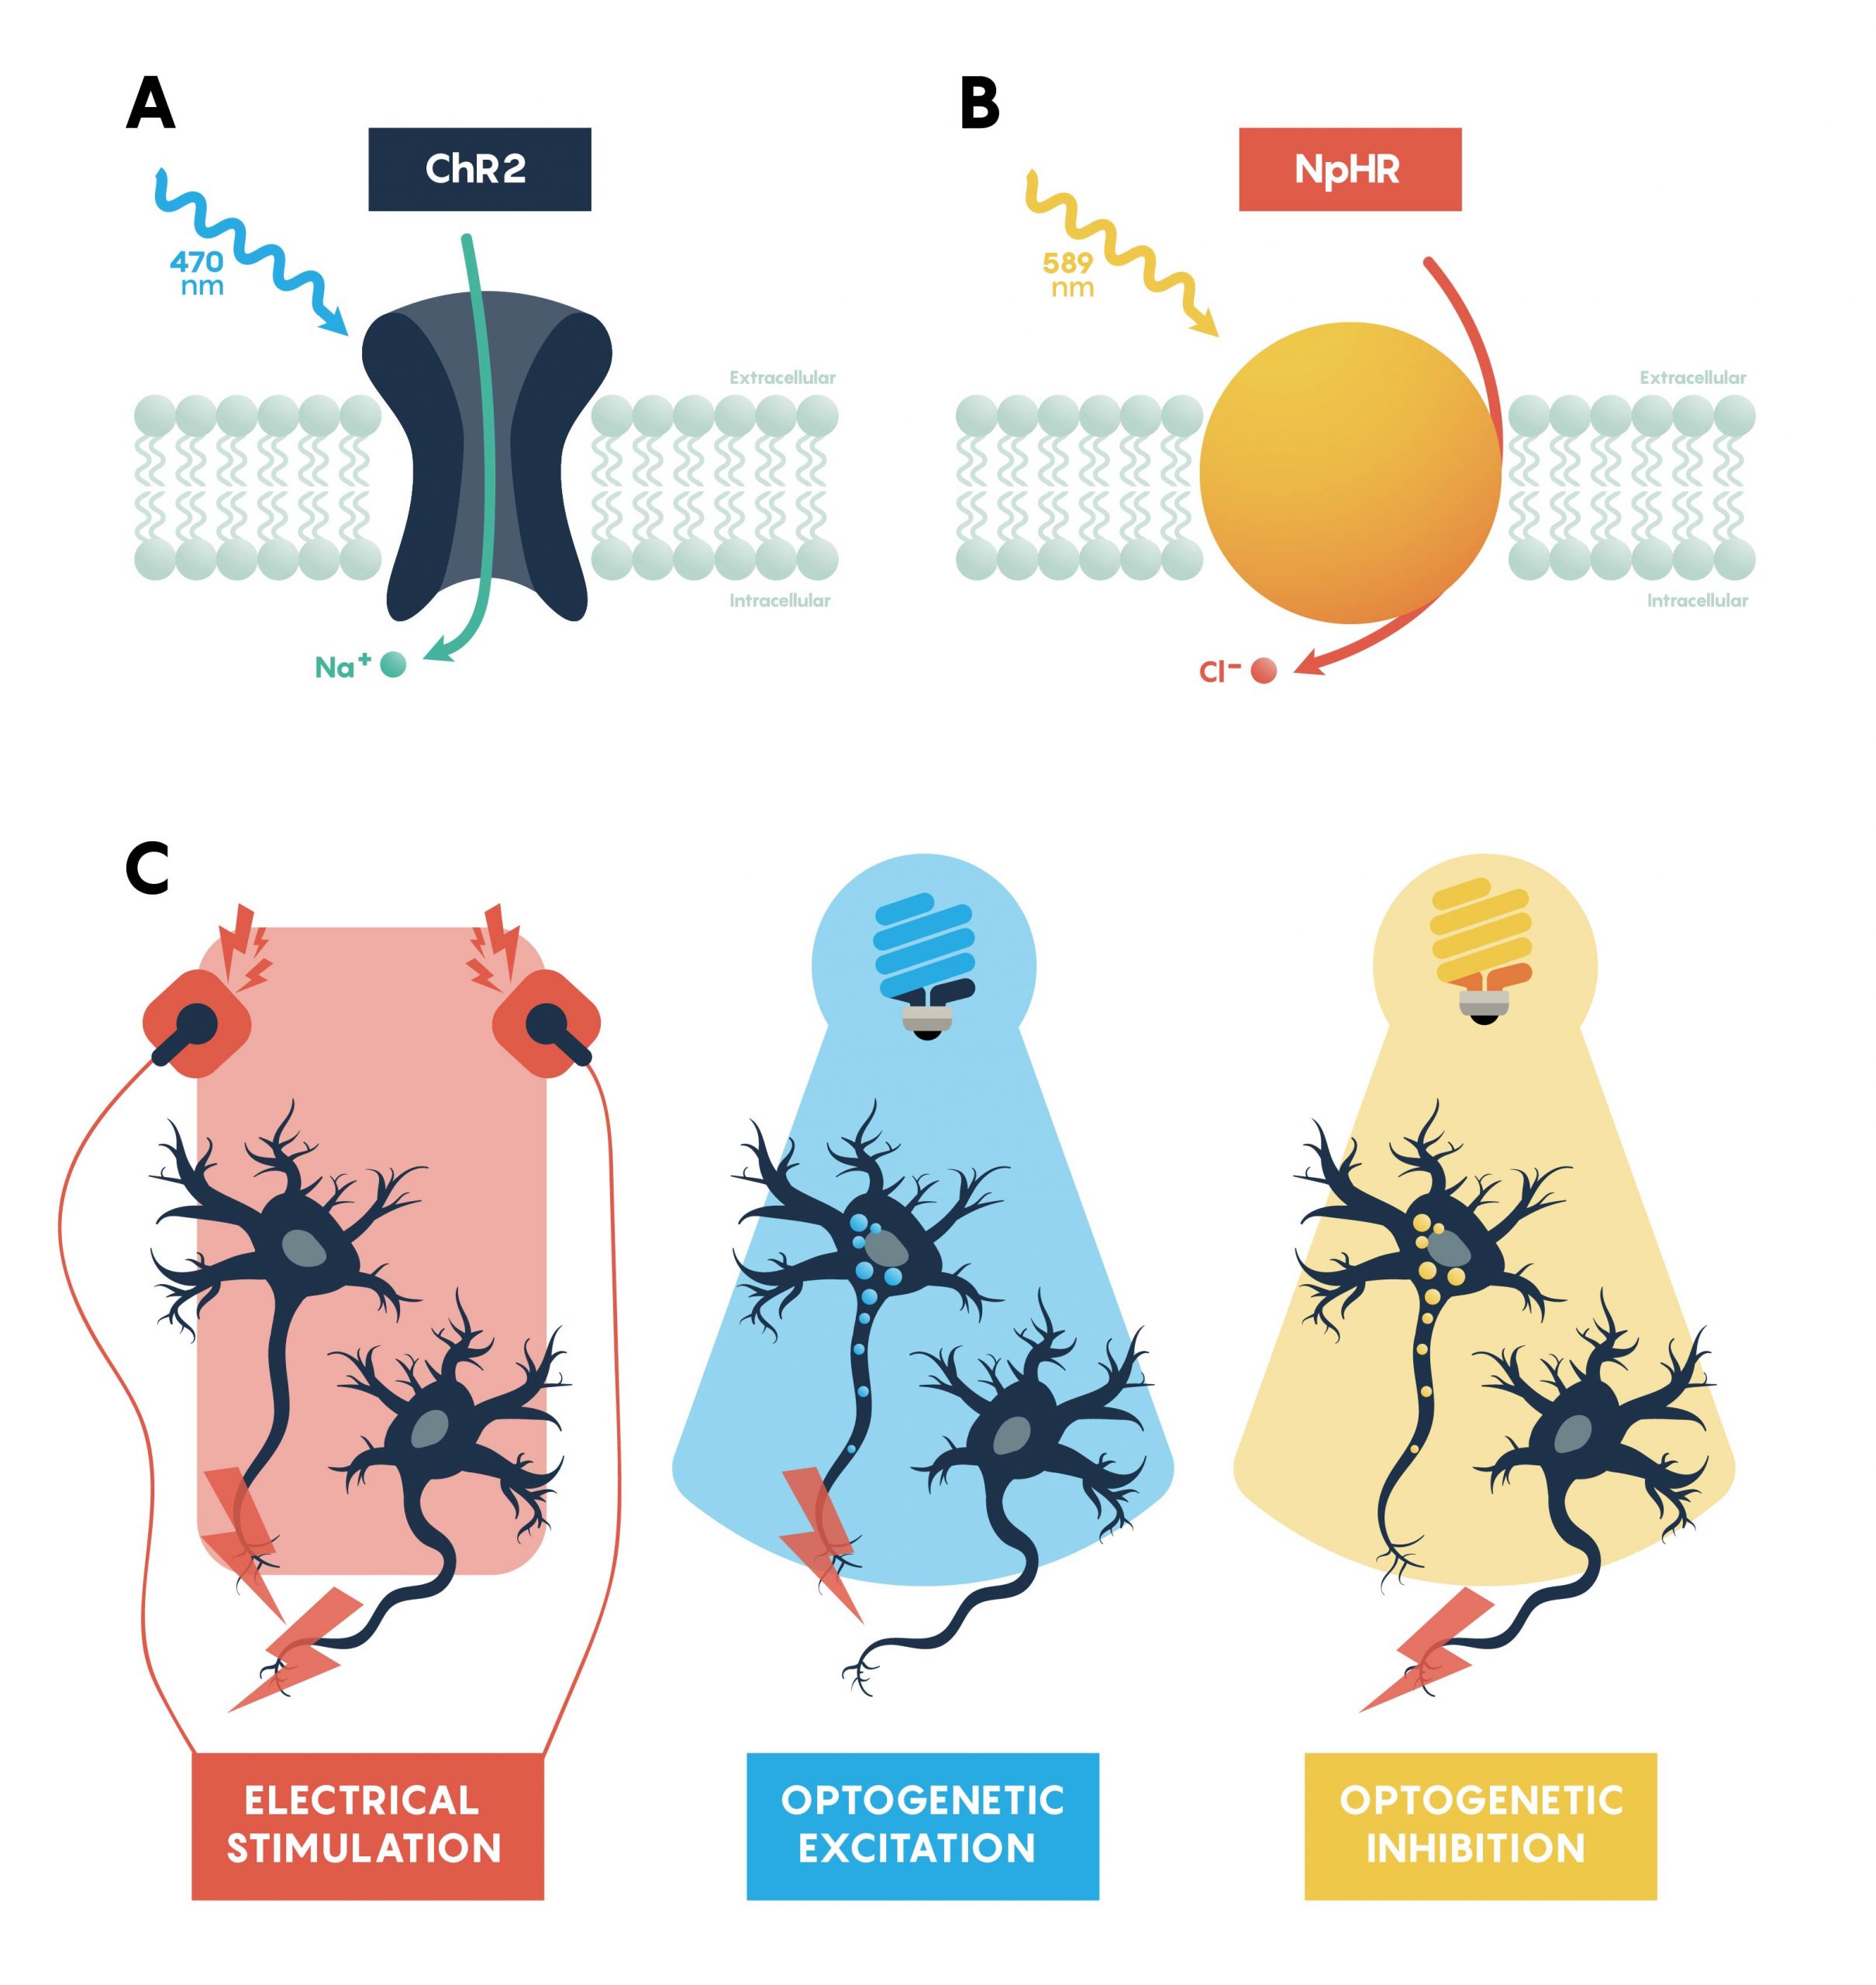 Panels summarizing the features of excitatory, ChR2, (A) and inhibitory, NpHR, (B) opsins. Panel C showing that all neurons would be excitable using a standard electrode. However, optogenetic excitation (blue light) and inhibition (yellow light) only work on specific neurons that express the appropriate opsin.